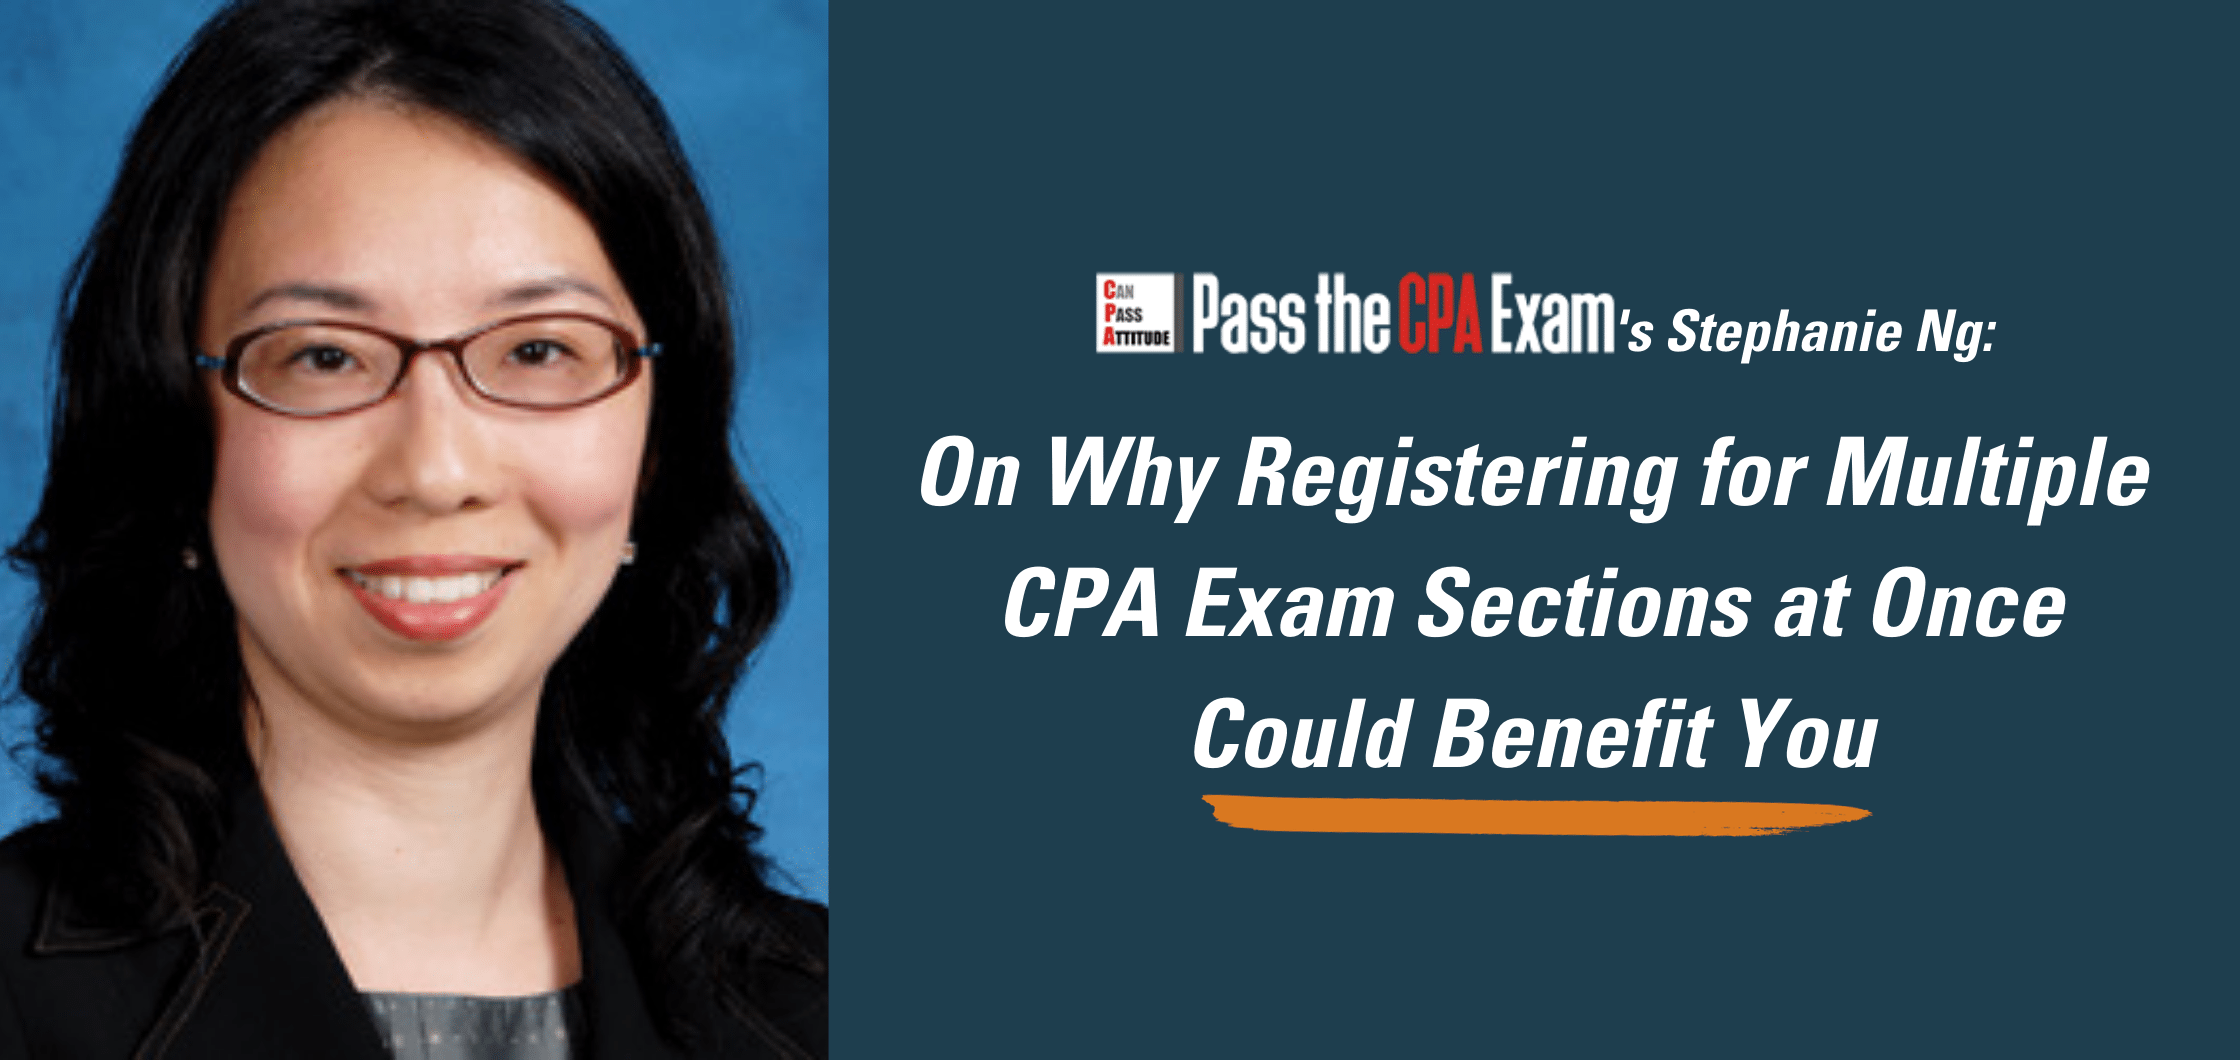 Stephanie Ng On Why Registering for Multiple CPA Exam Sections at Once Could Benefit You